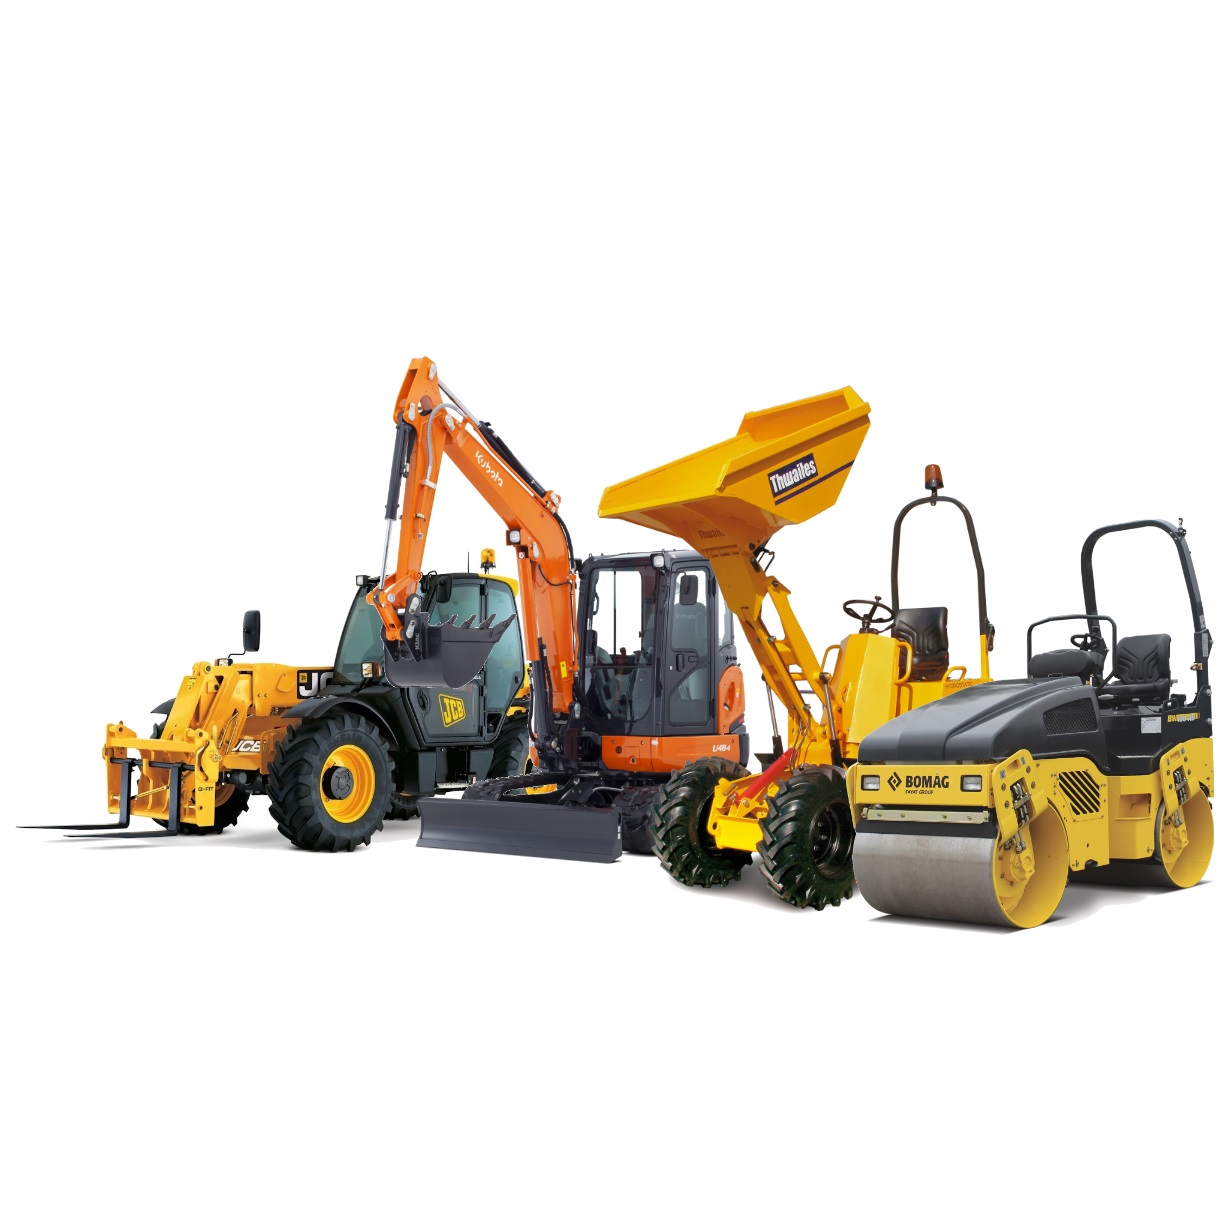 Plant Hire in Luton